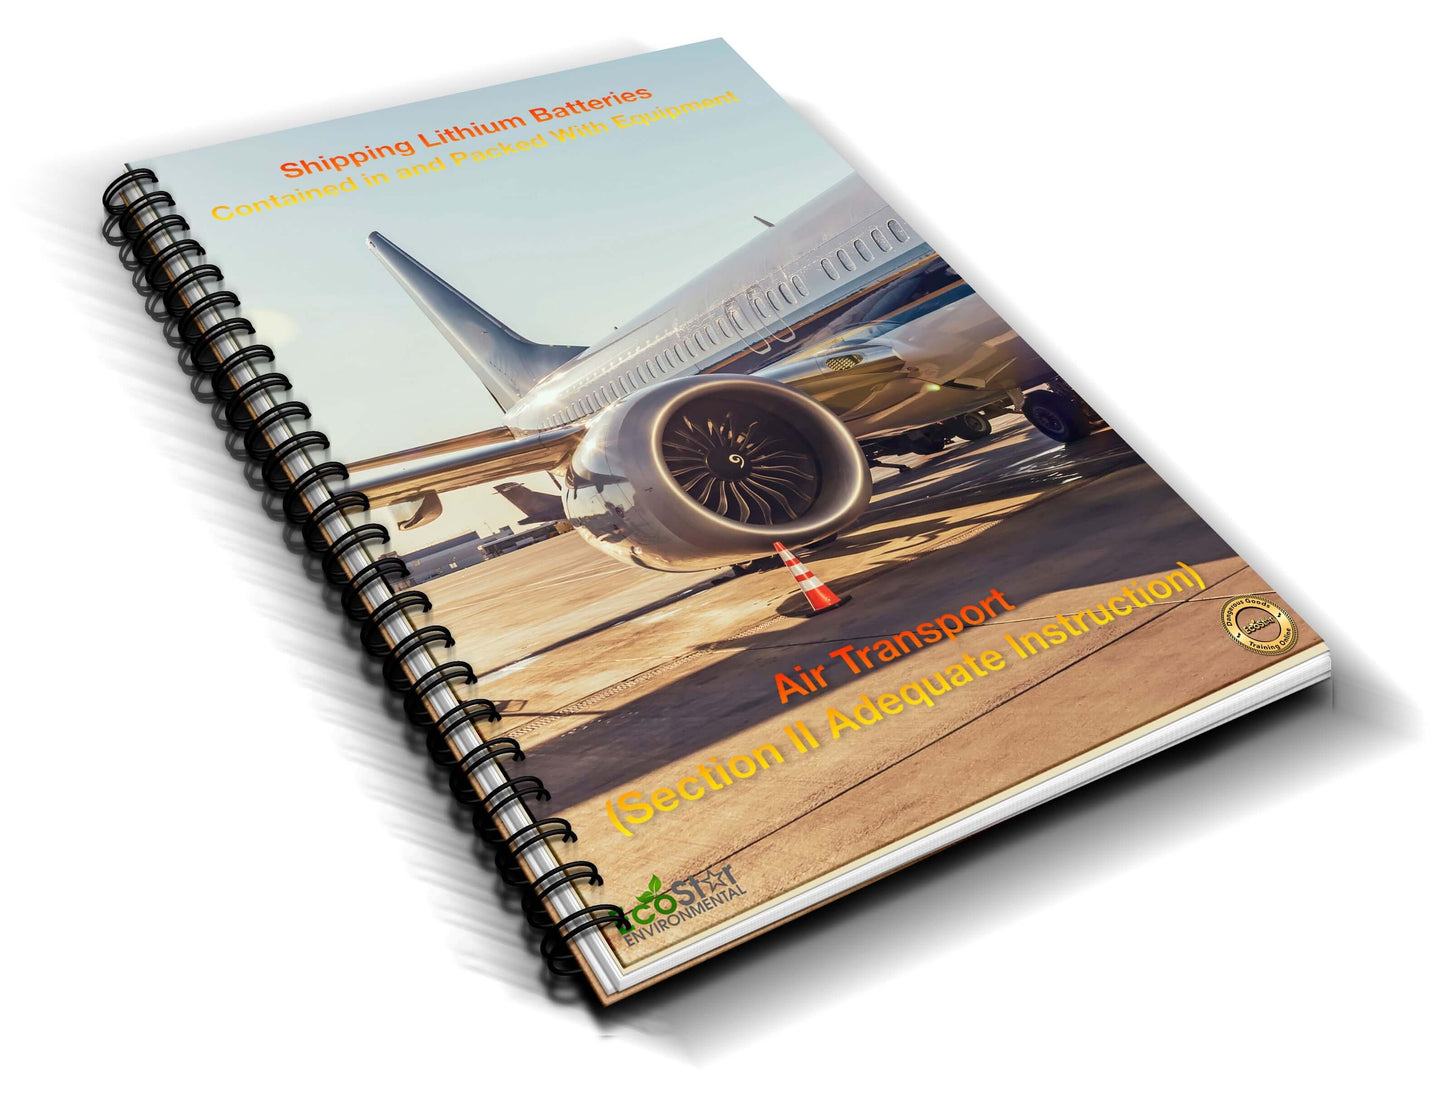 lithium batteries IATA section II by air guide book